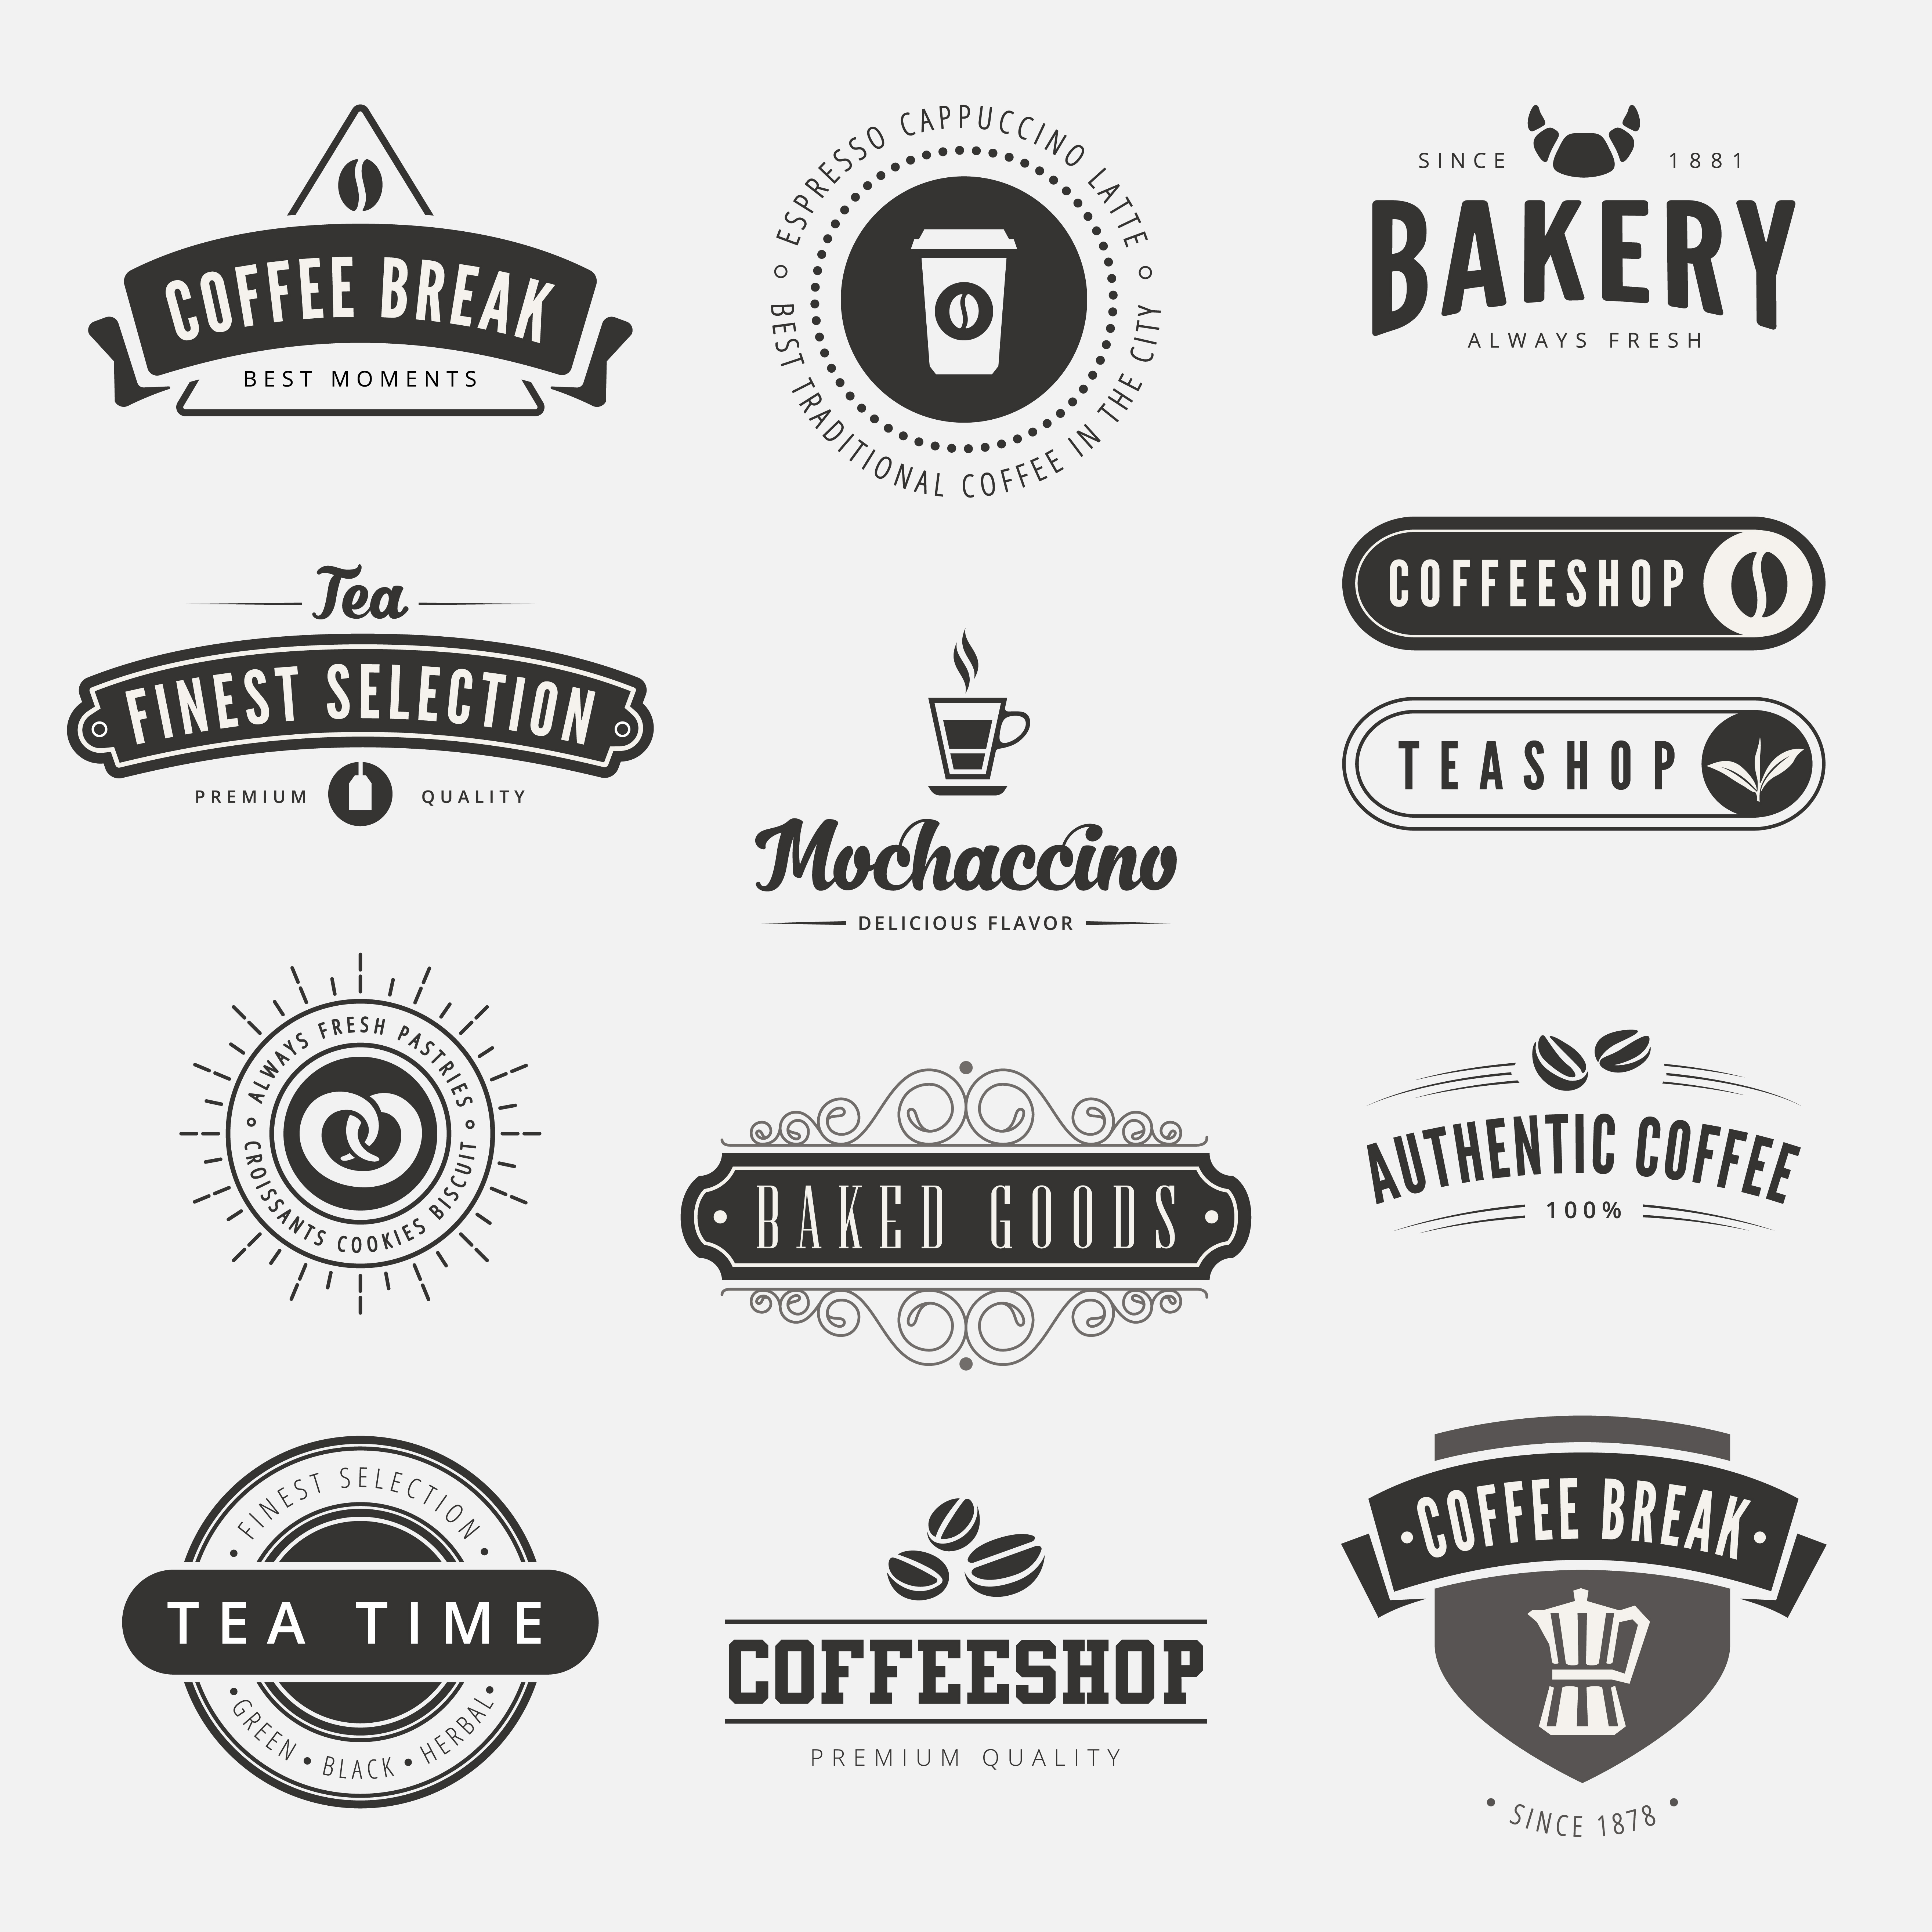 Coffee Retro Vintage Labels Logo design vector typography lettering inspiration templates. 
Old style elements, business signs, logos, label, badges, stamps and symbols.
Coffeeshop, tea, bakery theme.